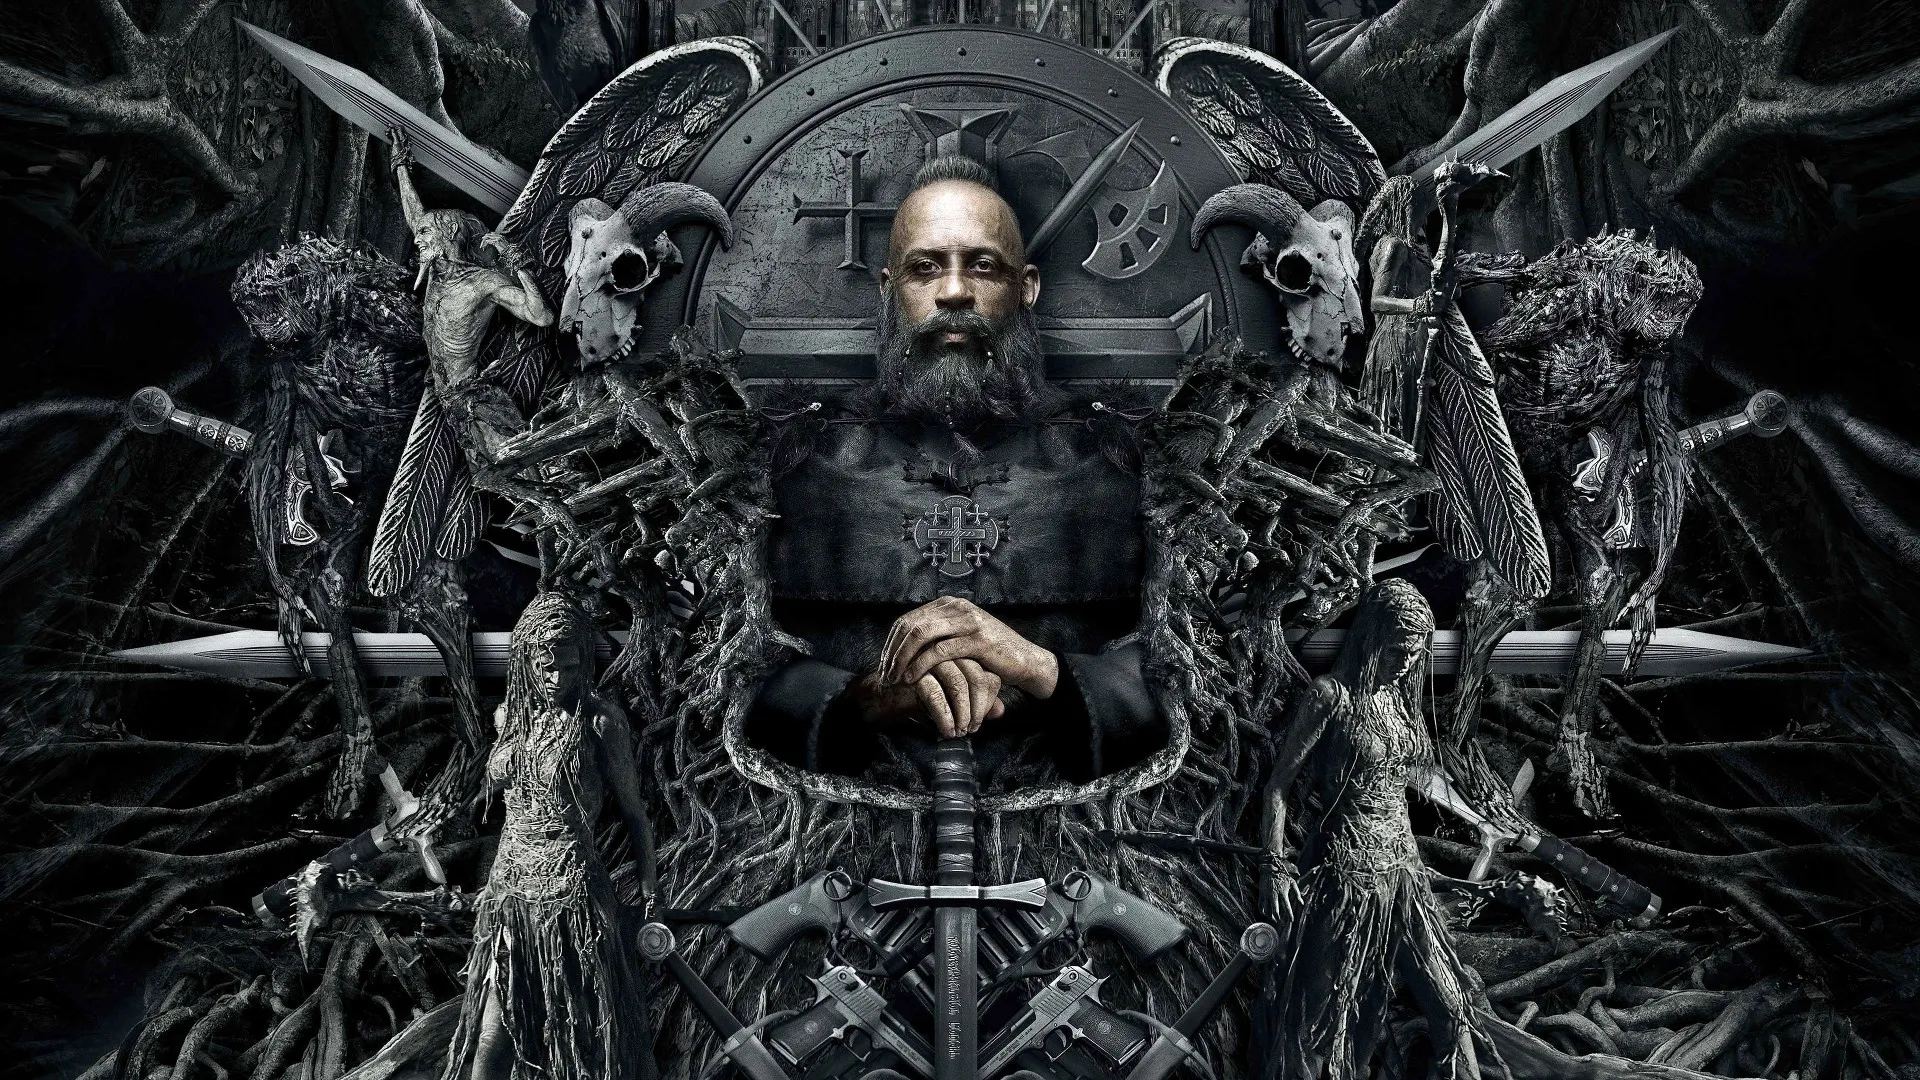 The Last Witch Hunter background